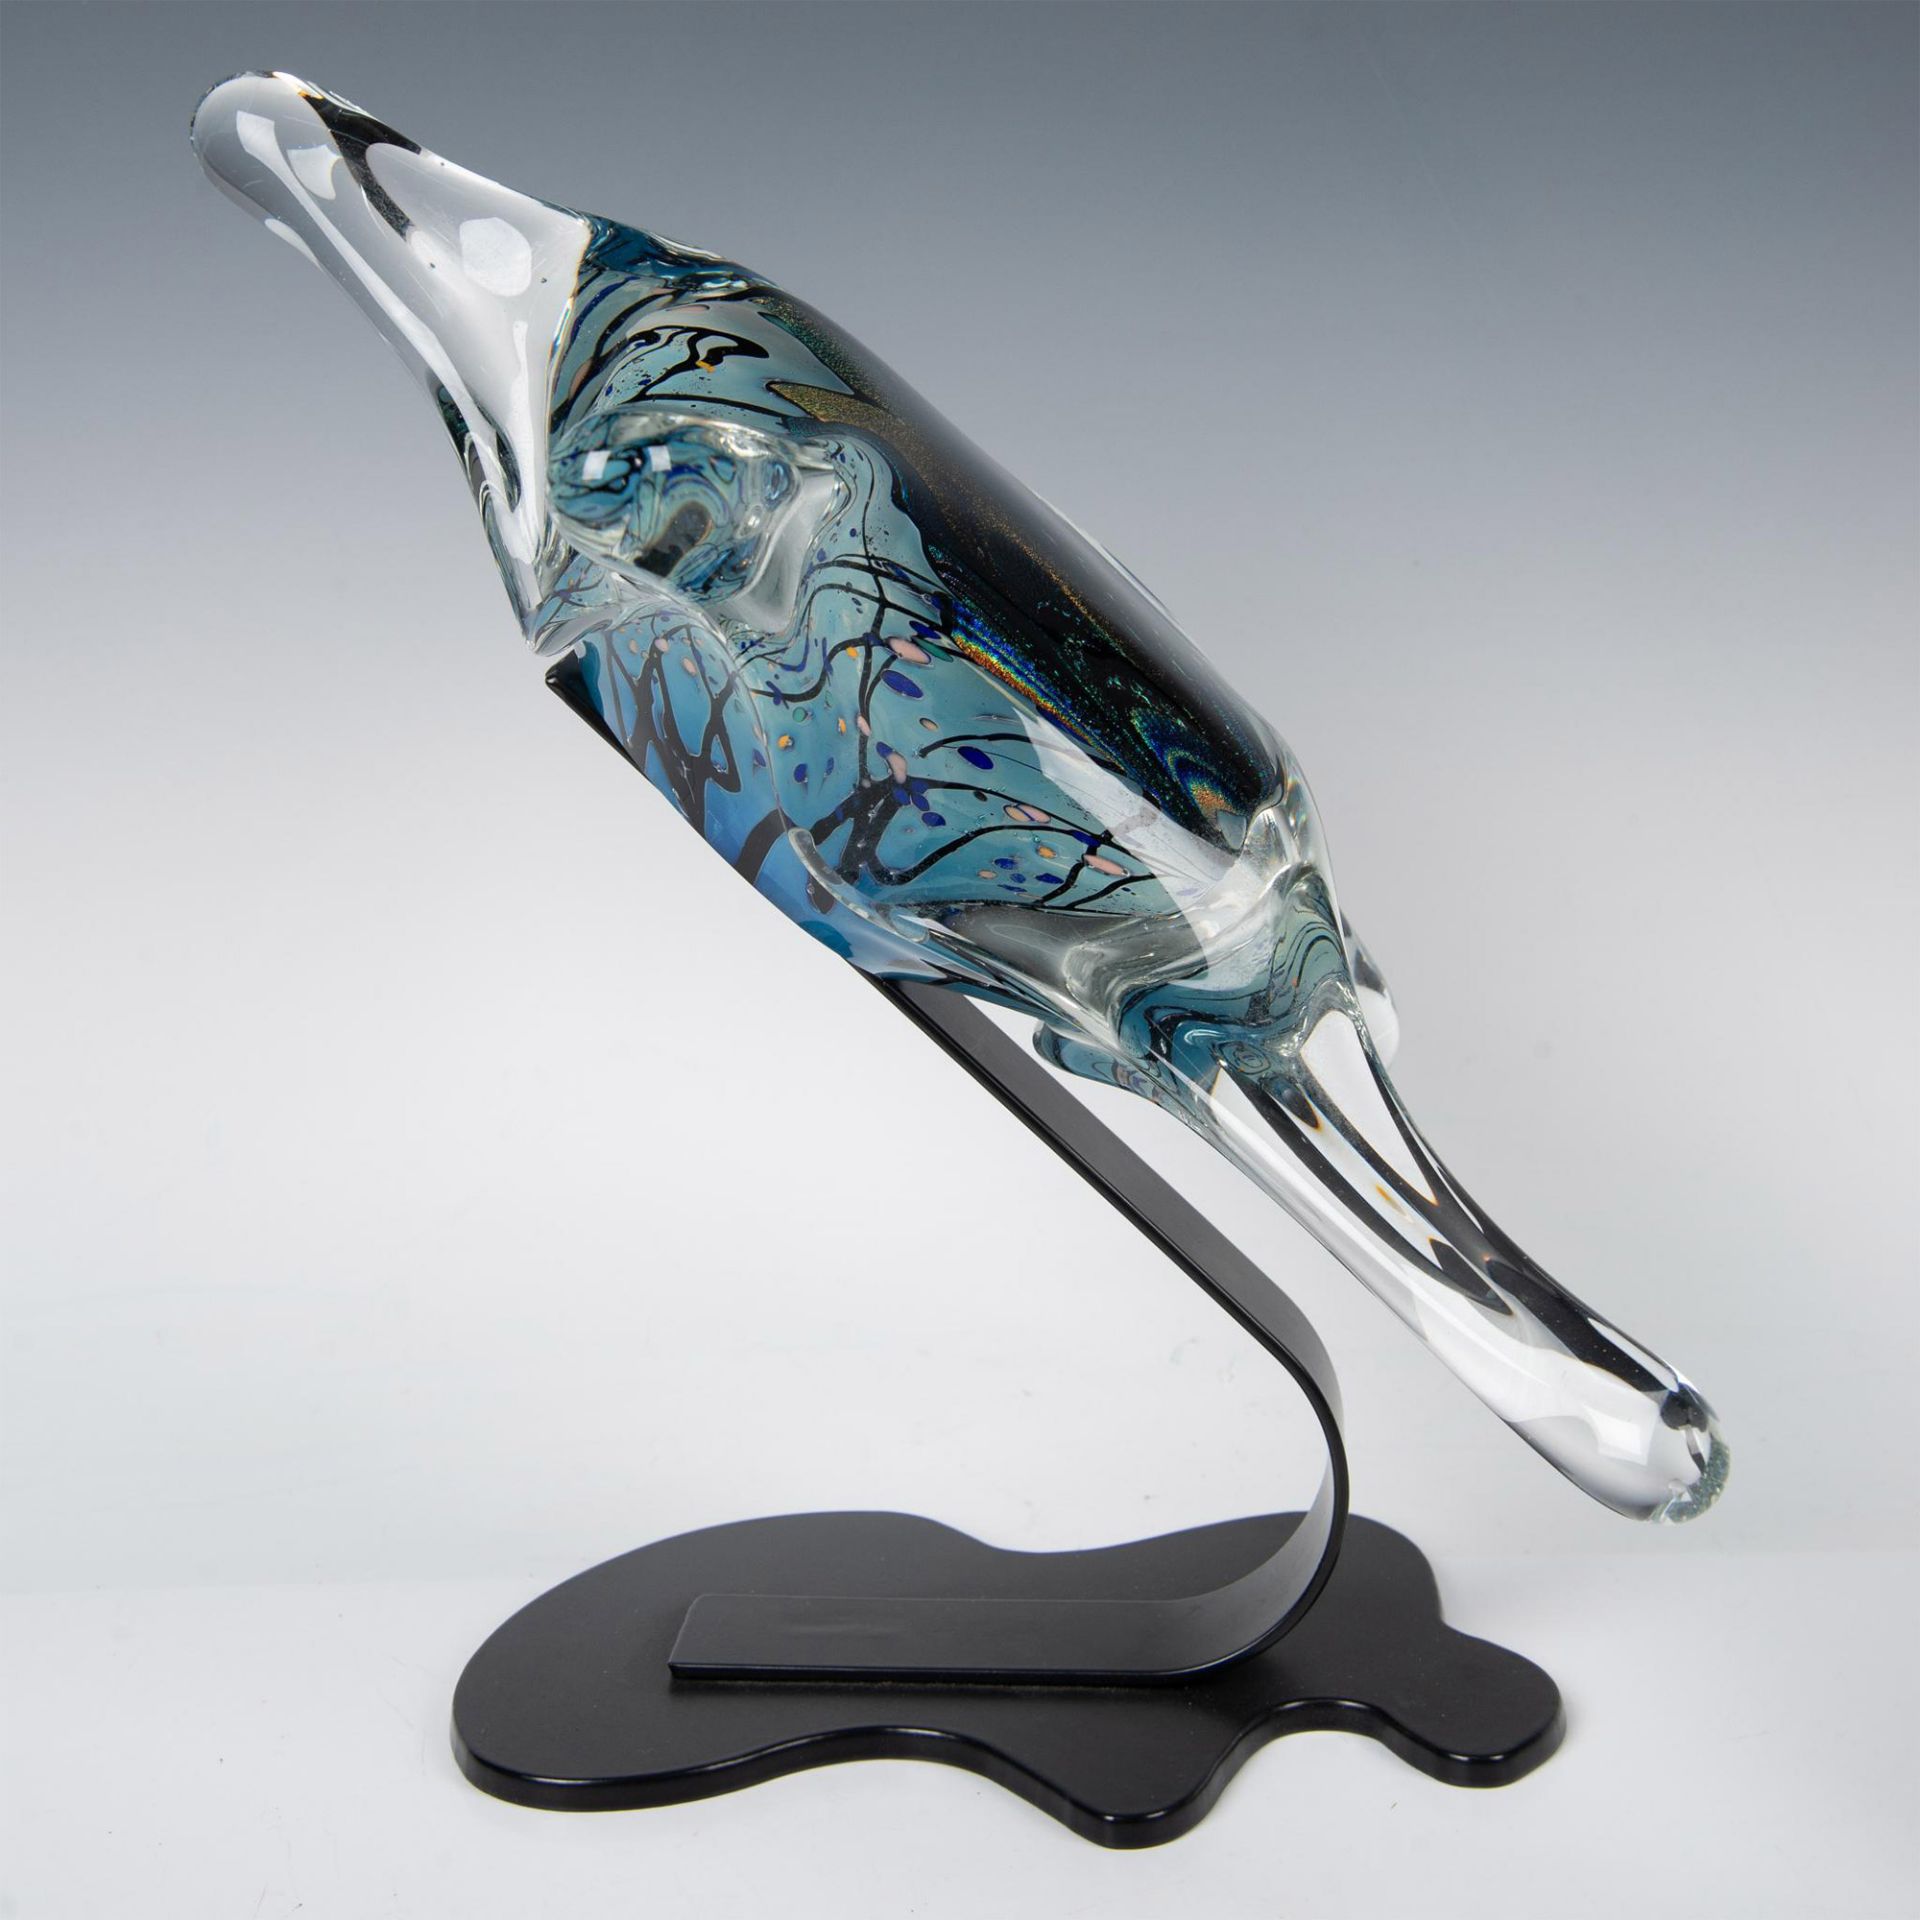 Rollin Karg Dichroic Art Glass Sculpture on Stand, Signed - Image 3 of 5